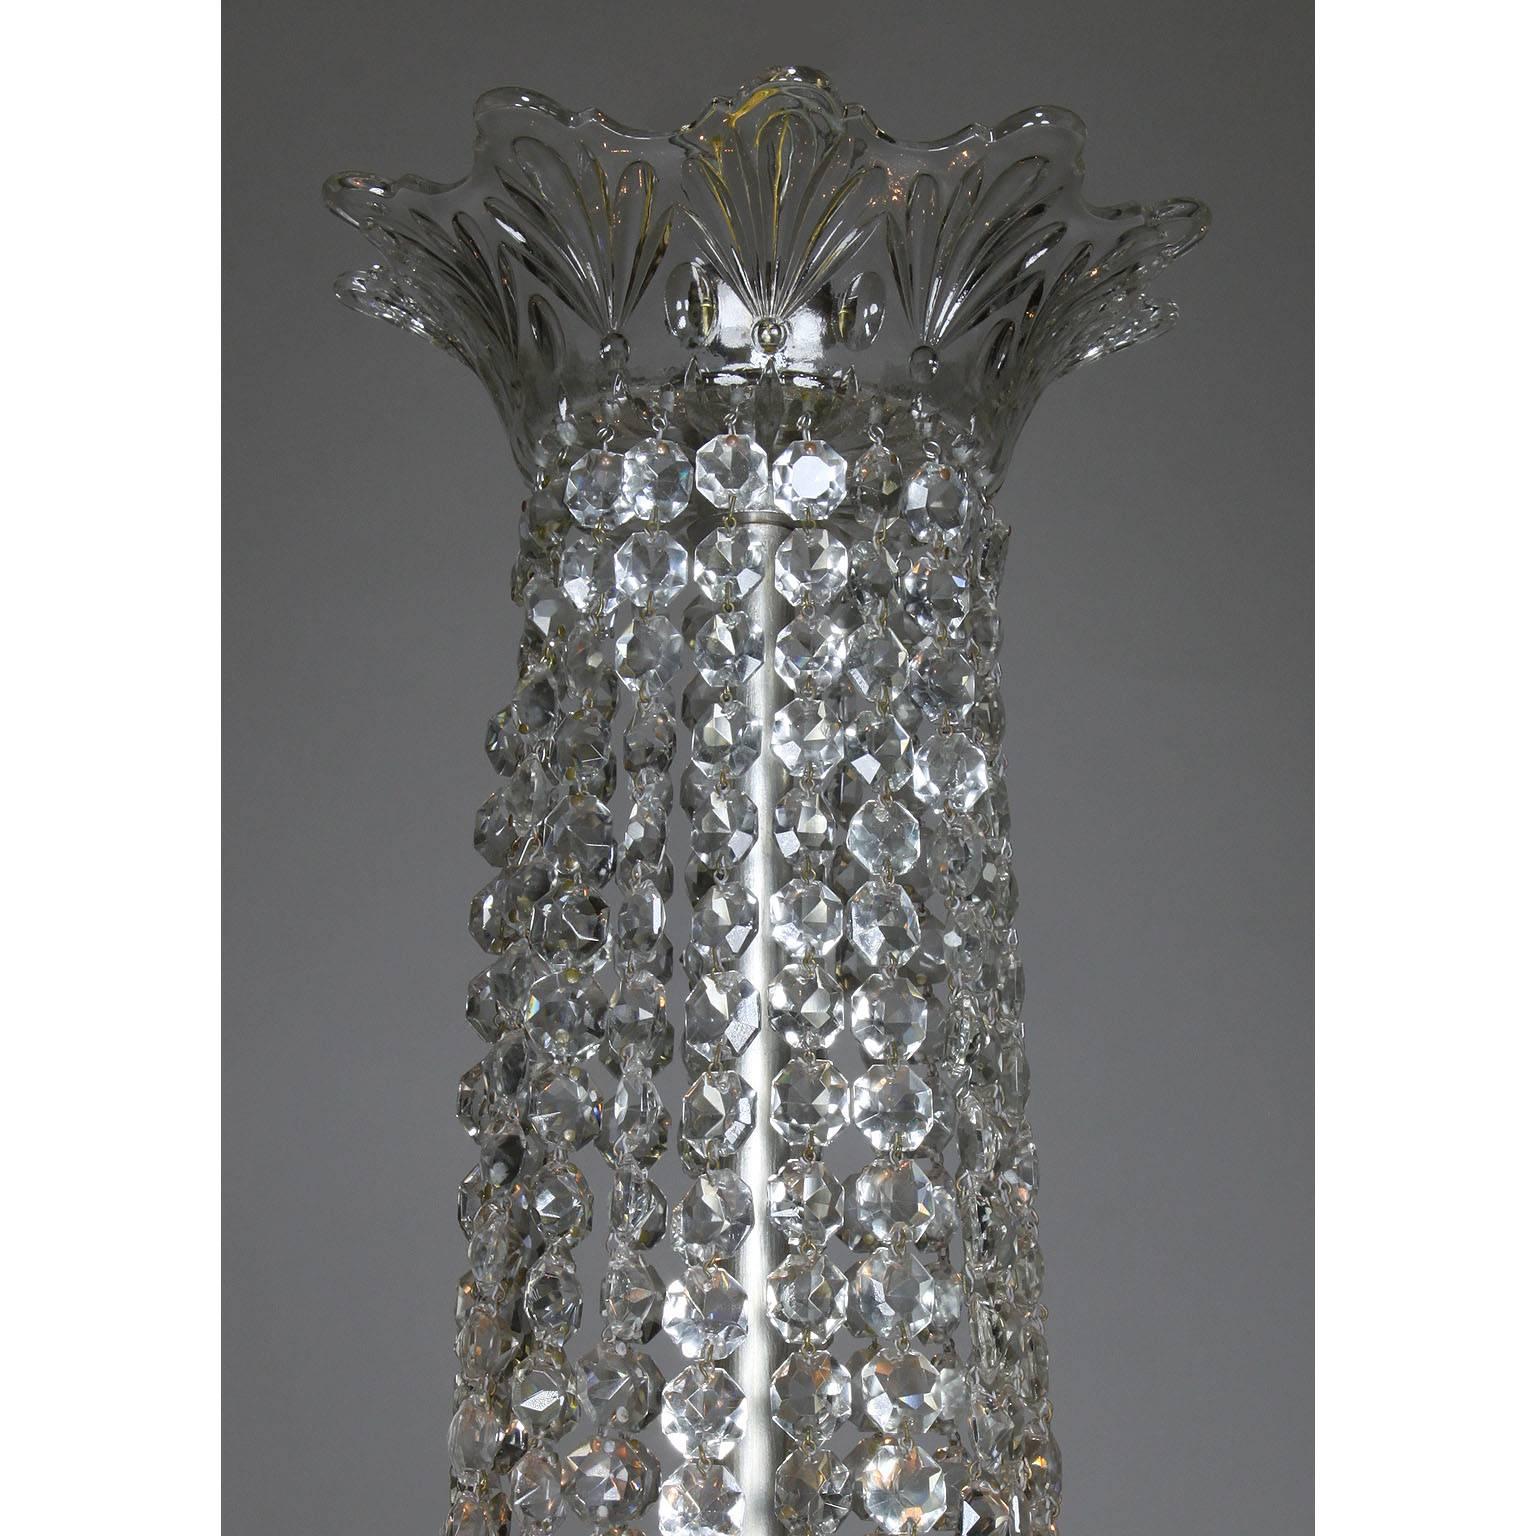 A fine French 19th-20th century Louis XVI style silvered bronze and cut-glass (Crystal) ten-light chandelier, in the manner of Baccarat. The elongated body surmounted with strands of diamond-cut-shaped glass prisms topped with a molded glass rosette